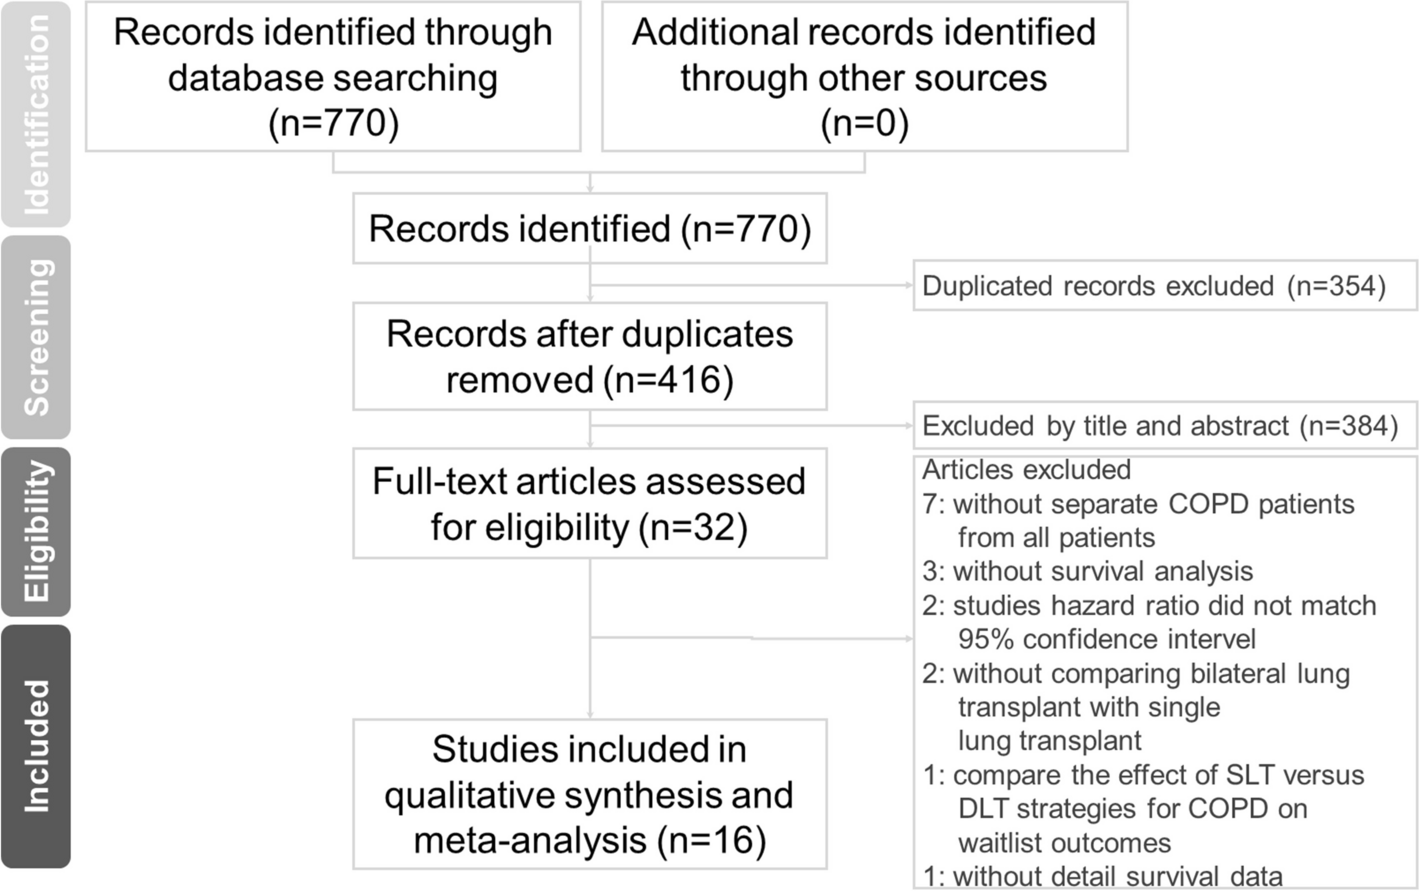 Double lung transplantation is better than single lung transplantation for end-stage chronic obstructive pulmonary disease: a meta-analysis